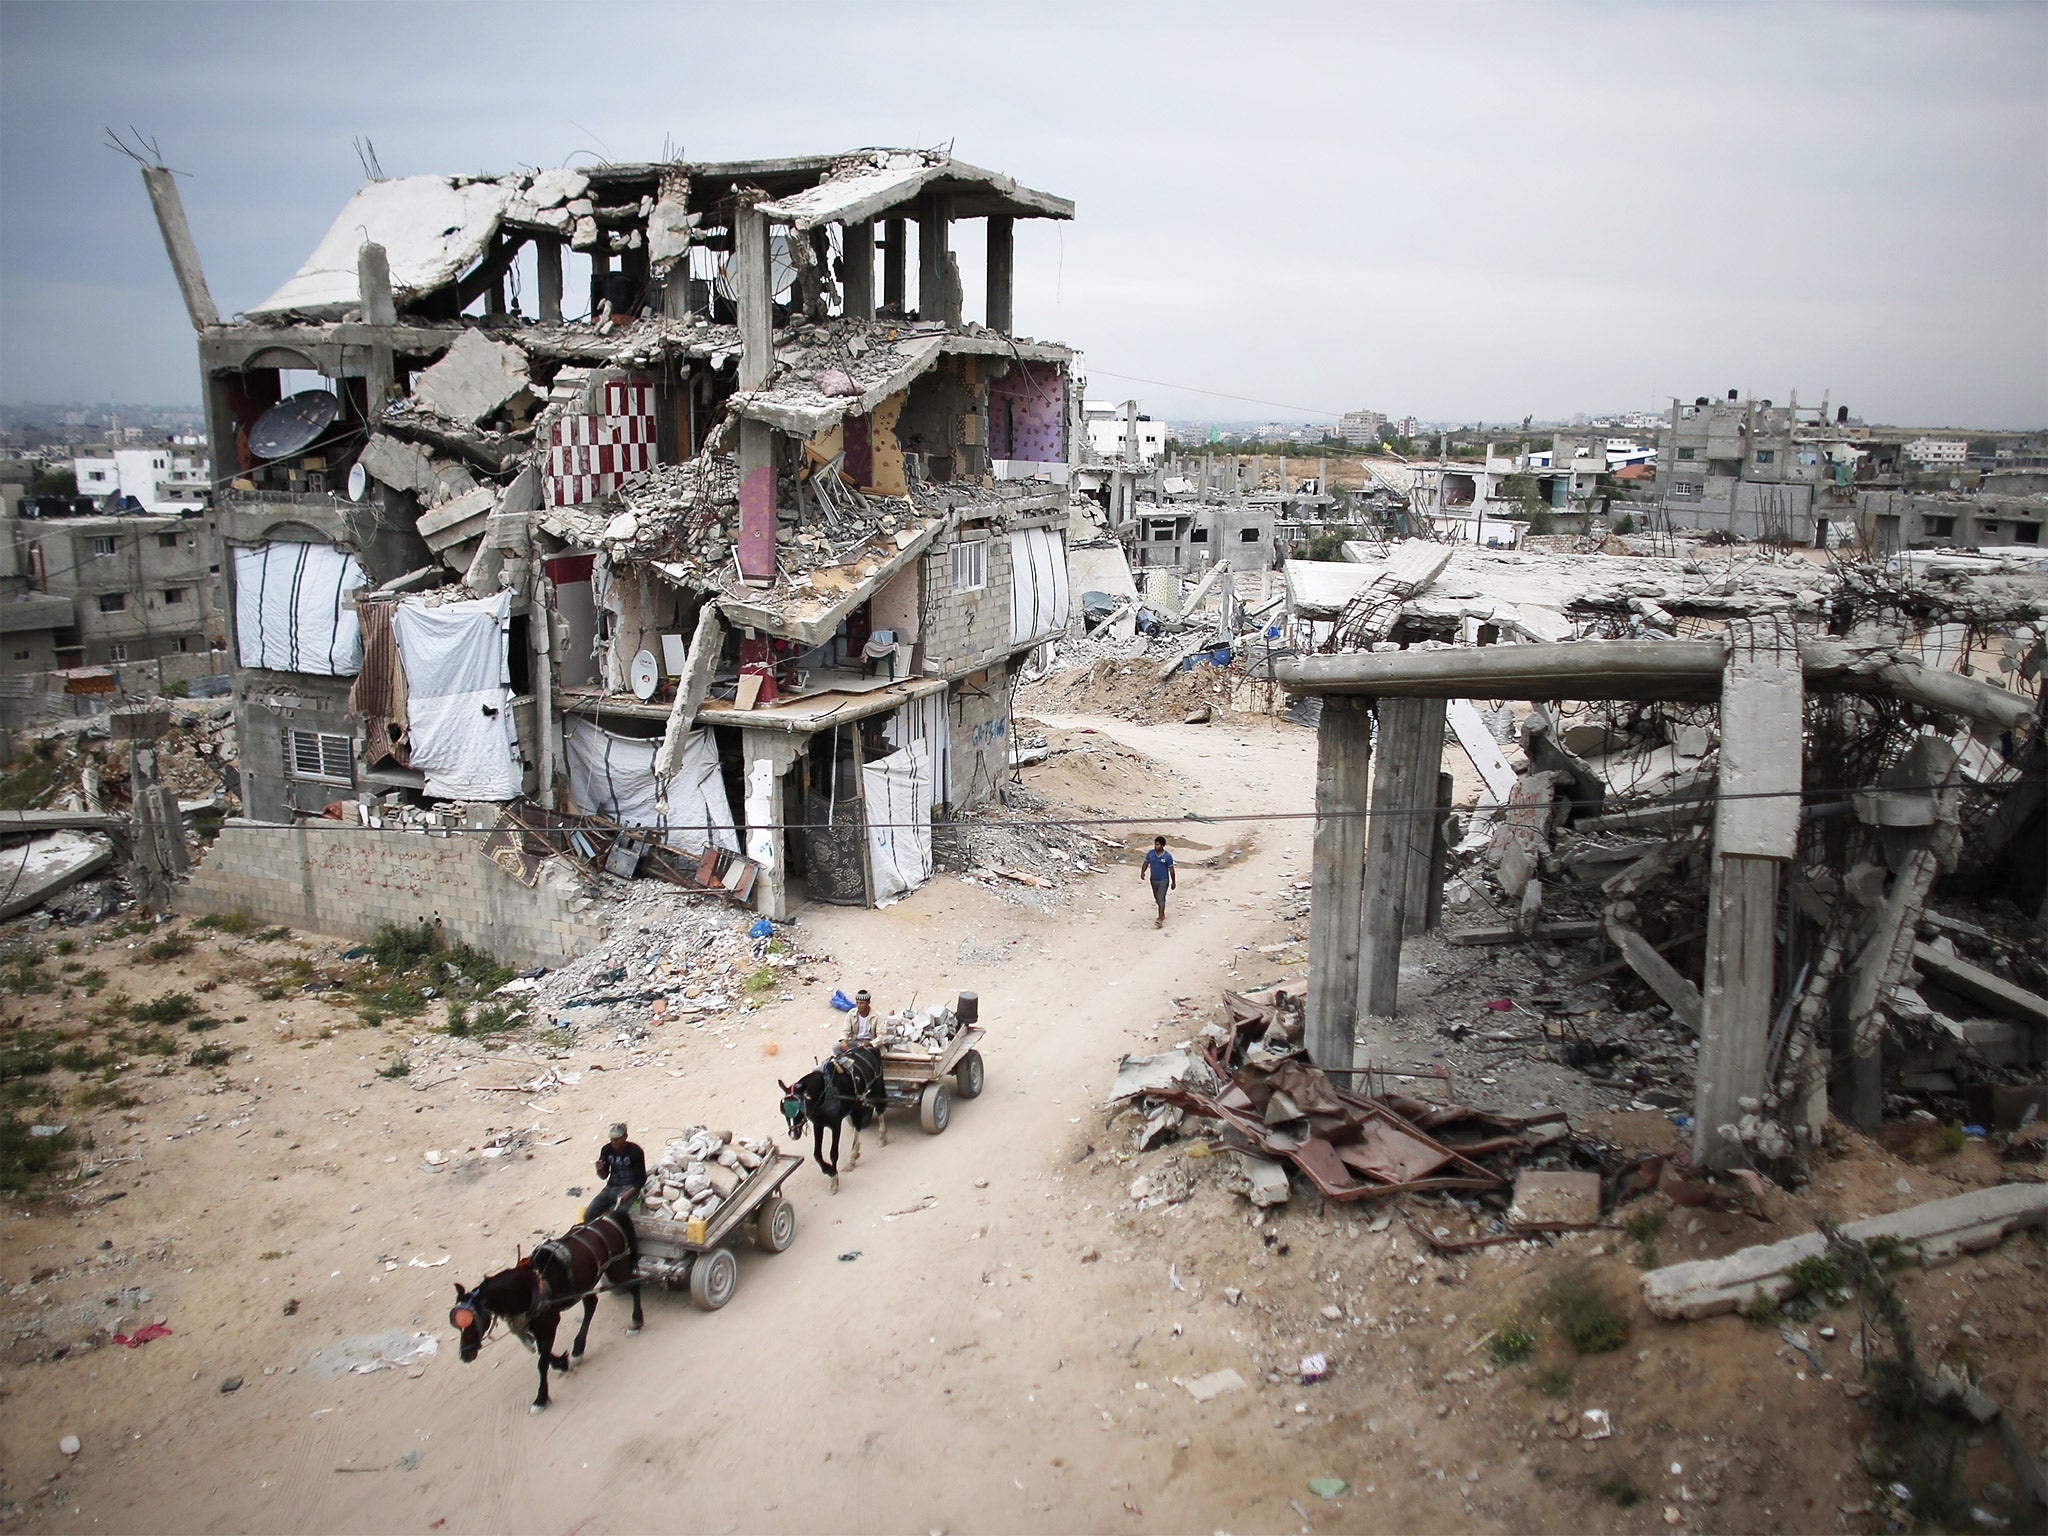 Parts of eastern Gaza are still in ruins, a year on from the 50-day war. Relations between Israel and Hamas could thaw thanks to a common goal of defeating Isis